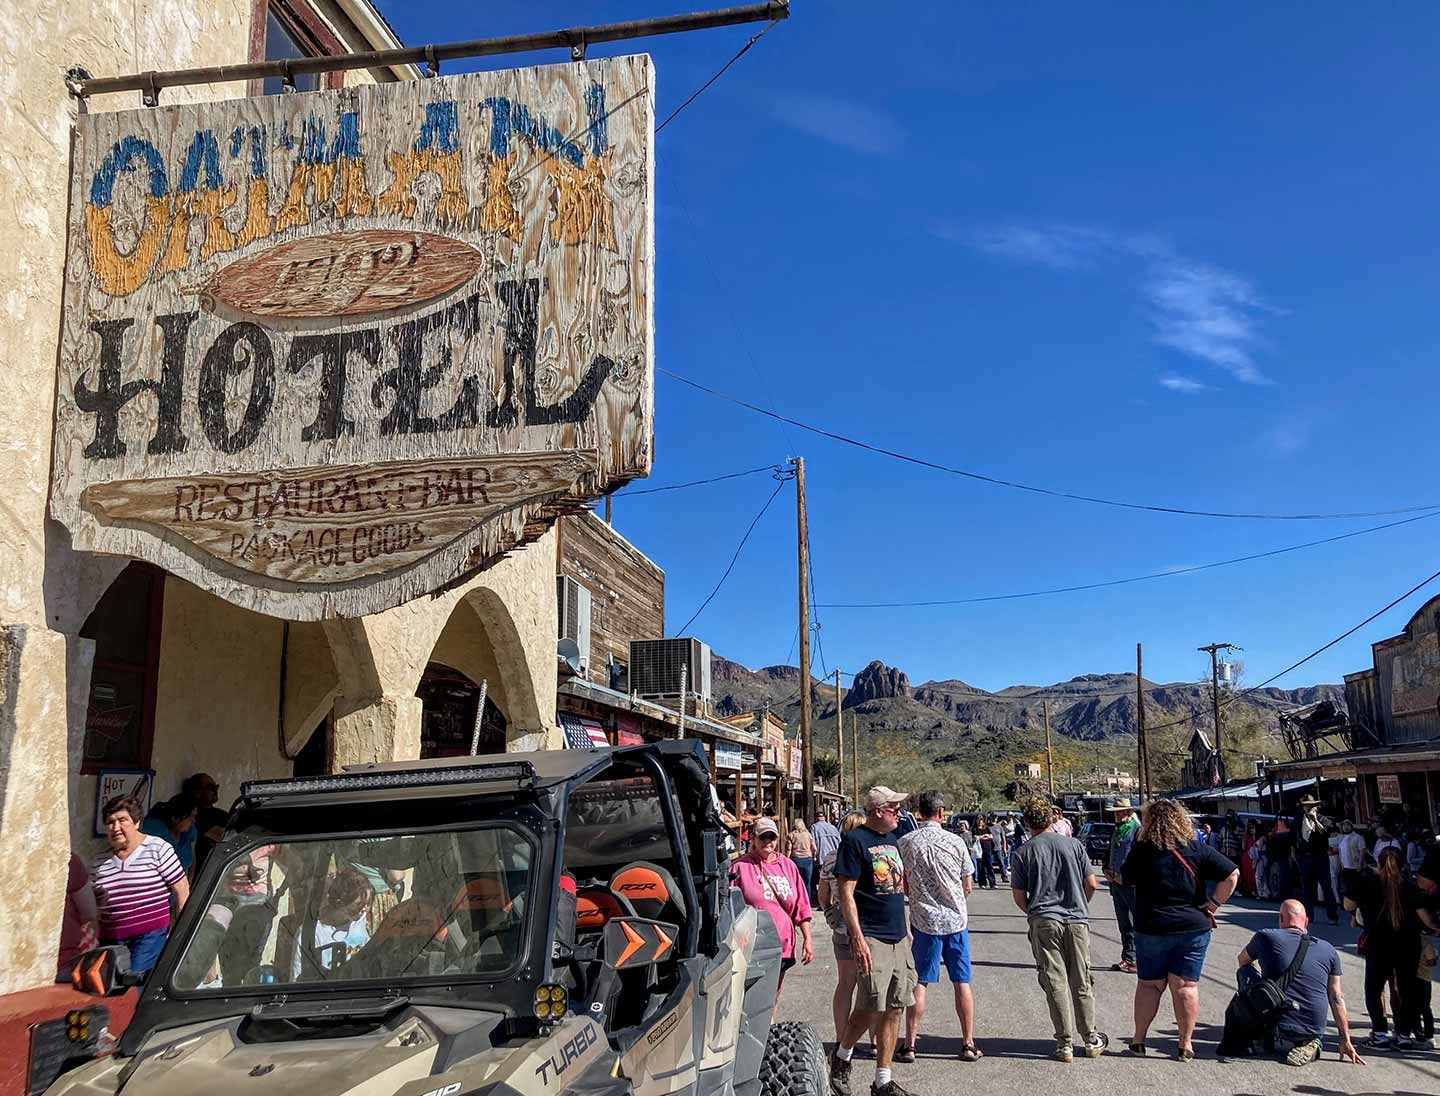 Built in 1902, the Oatman Hotel did not actually host actors Clark Gable and Carol Lombard on their 1939 honeymoon.